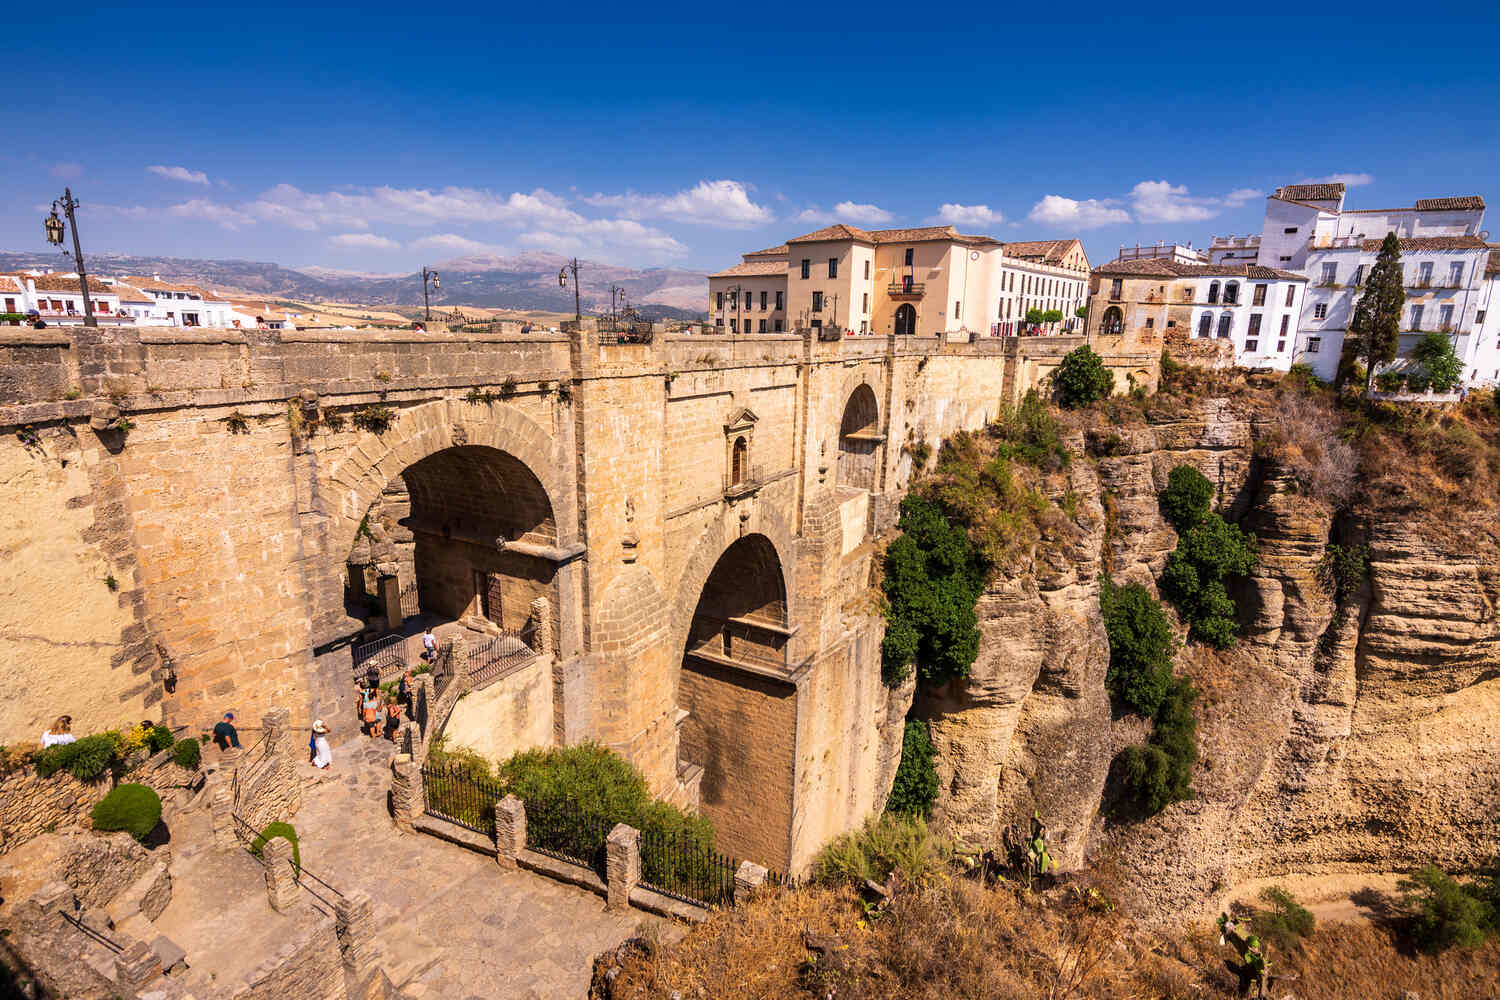 View of Ronda's Puente Nuevo bridge spanning a deep gorge under a clear sky.